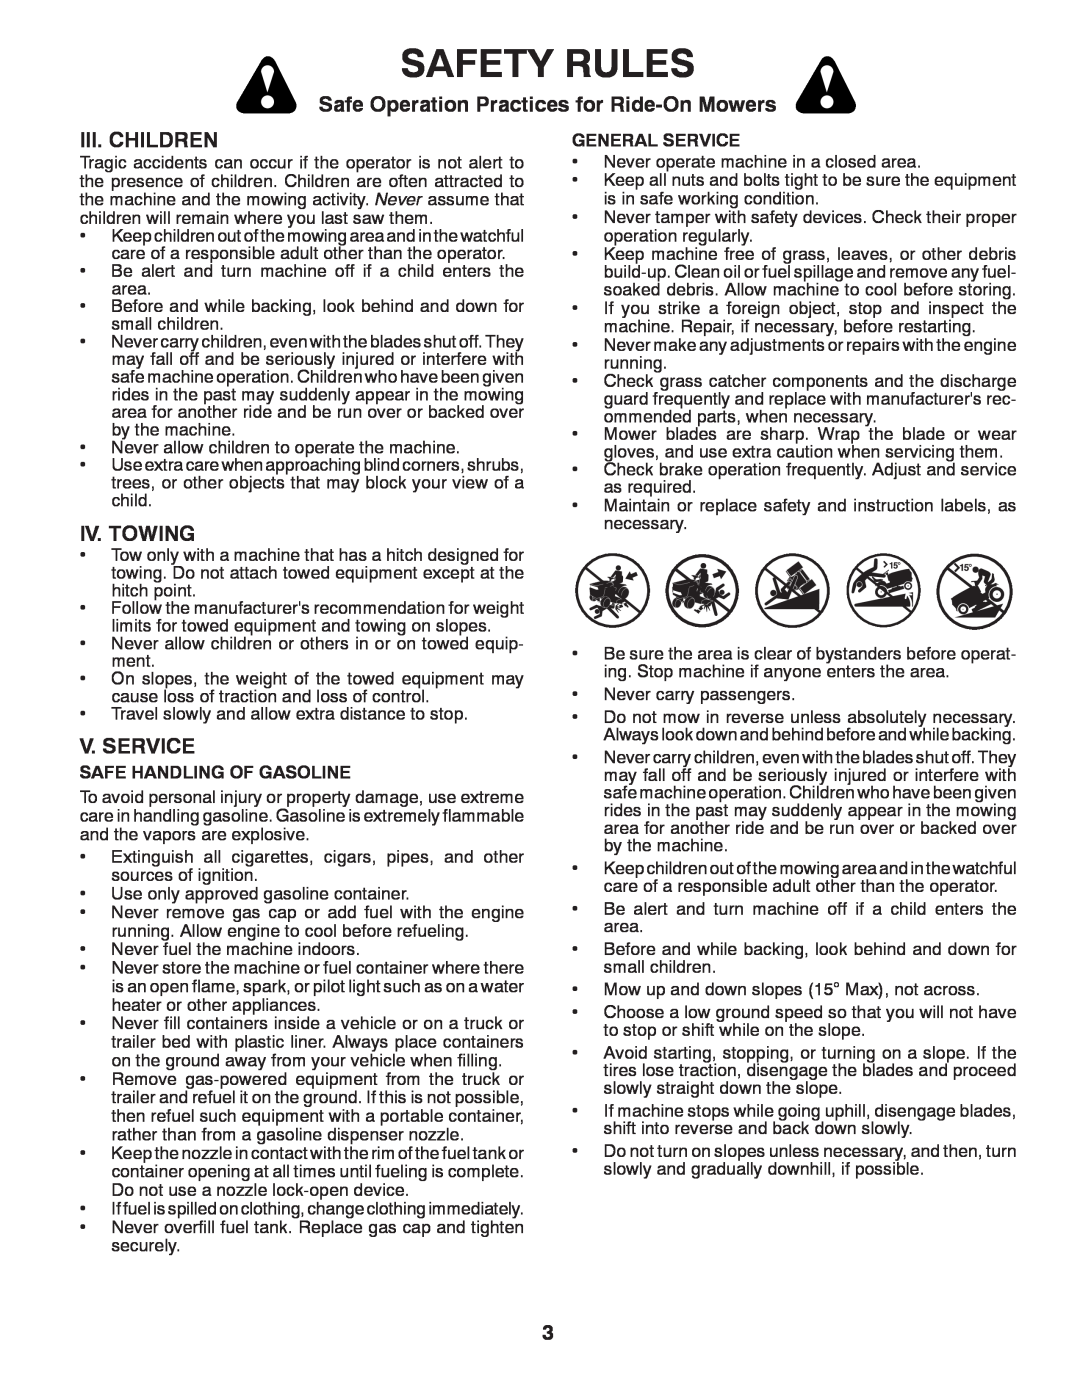 Husqvarna 532 42 84-01 Iii. Children, Iv. Towing, V. Service, Safety Rules, Safe Operation Practices for Ride-On Mowers 